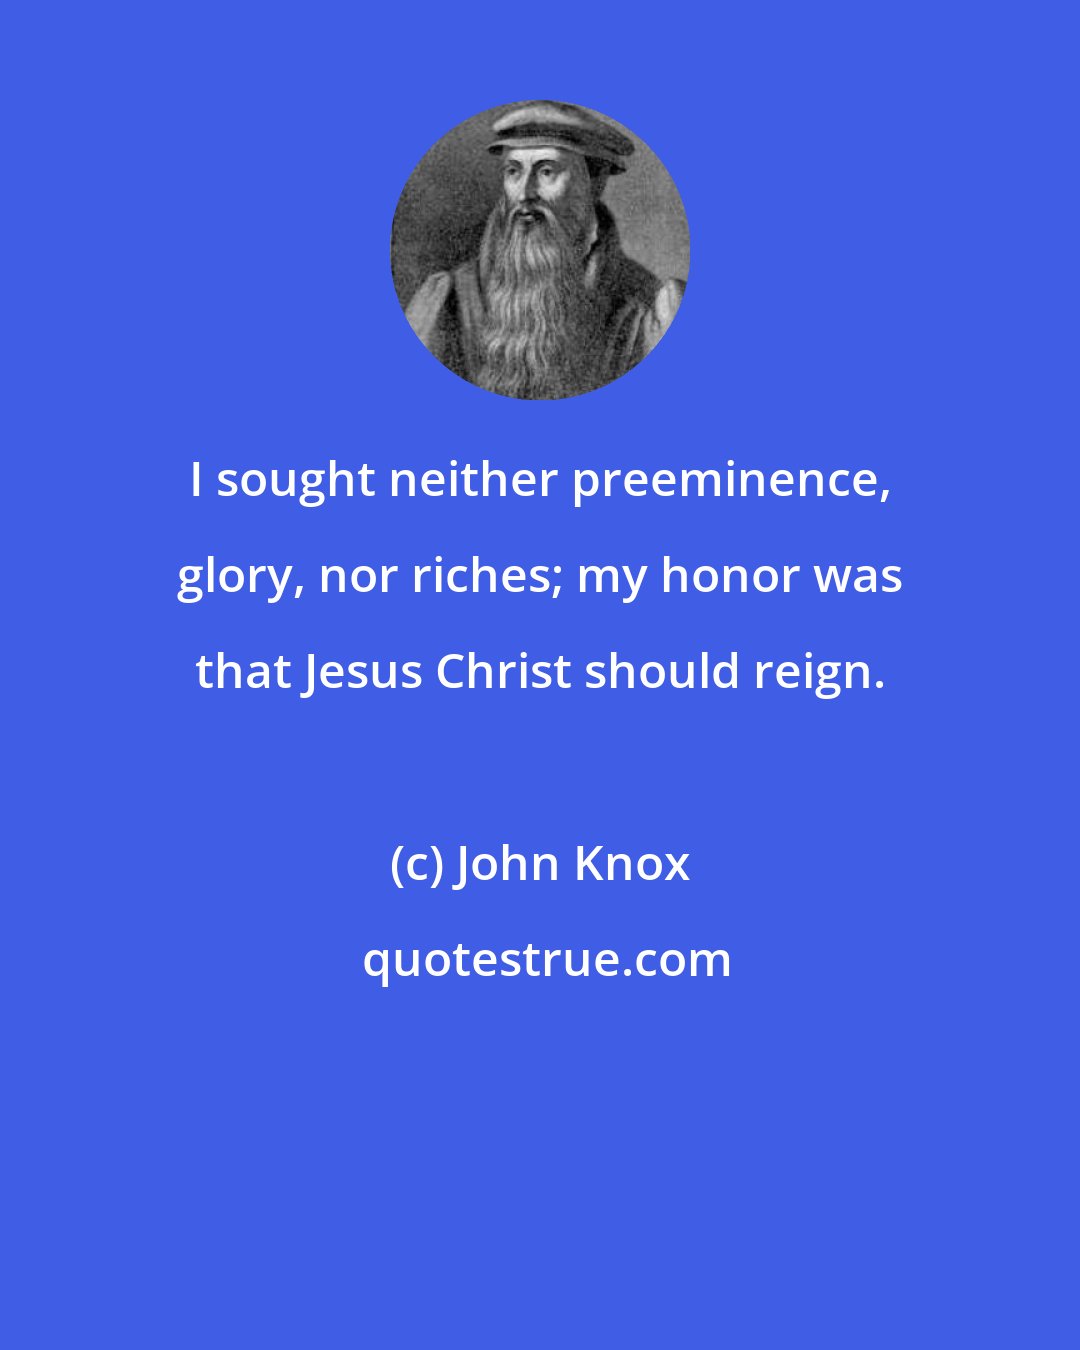 John Knox: I sought neither preeminence, glory, nor riches; my honor was that Jesus Christ should reign.